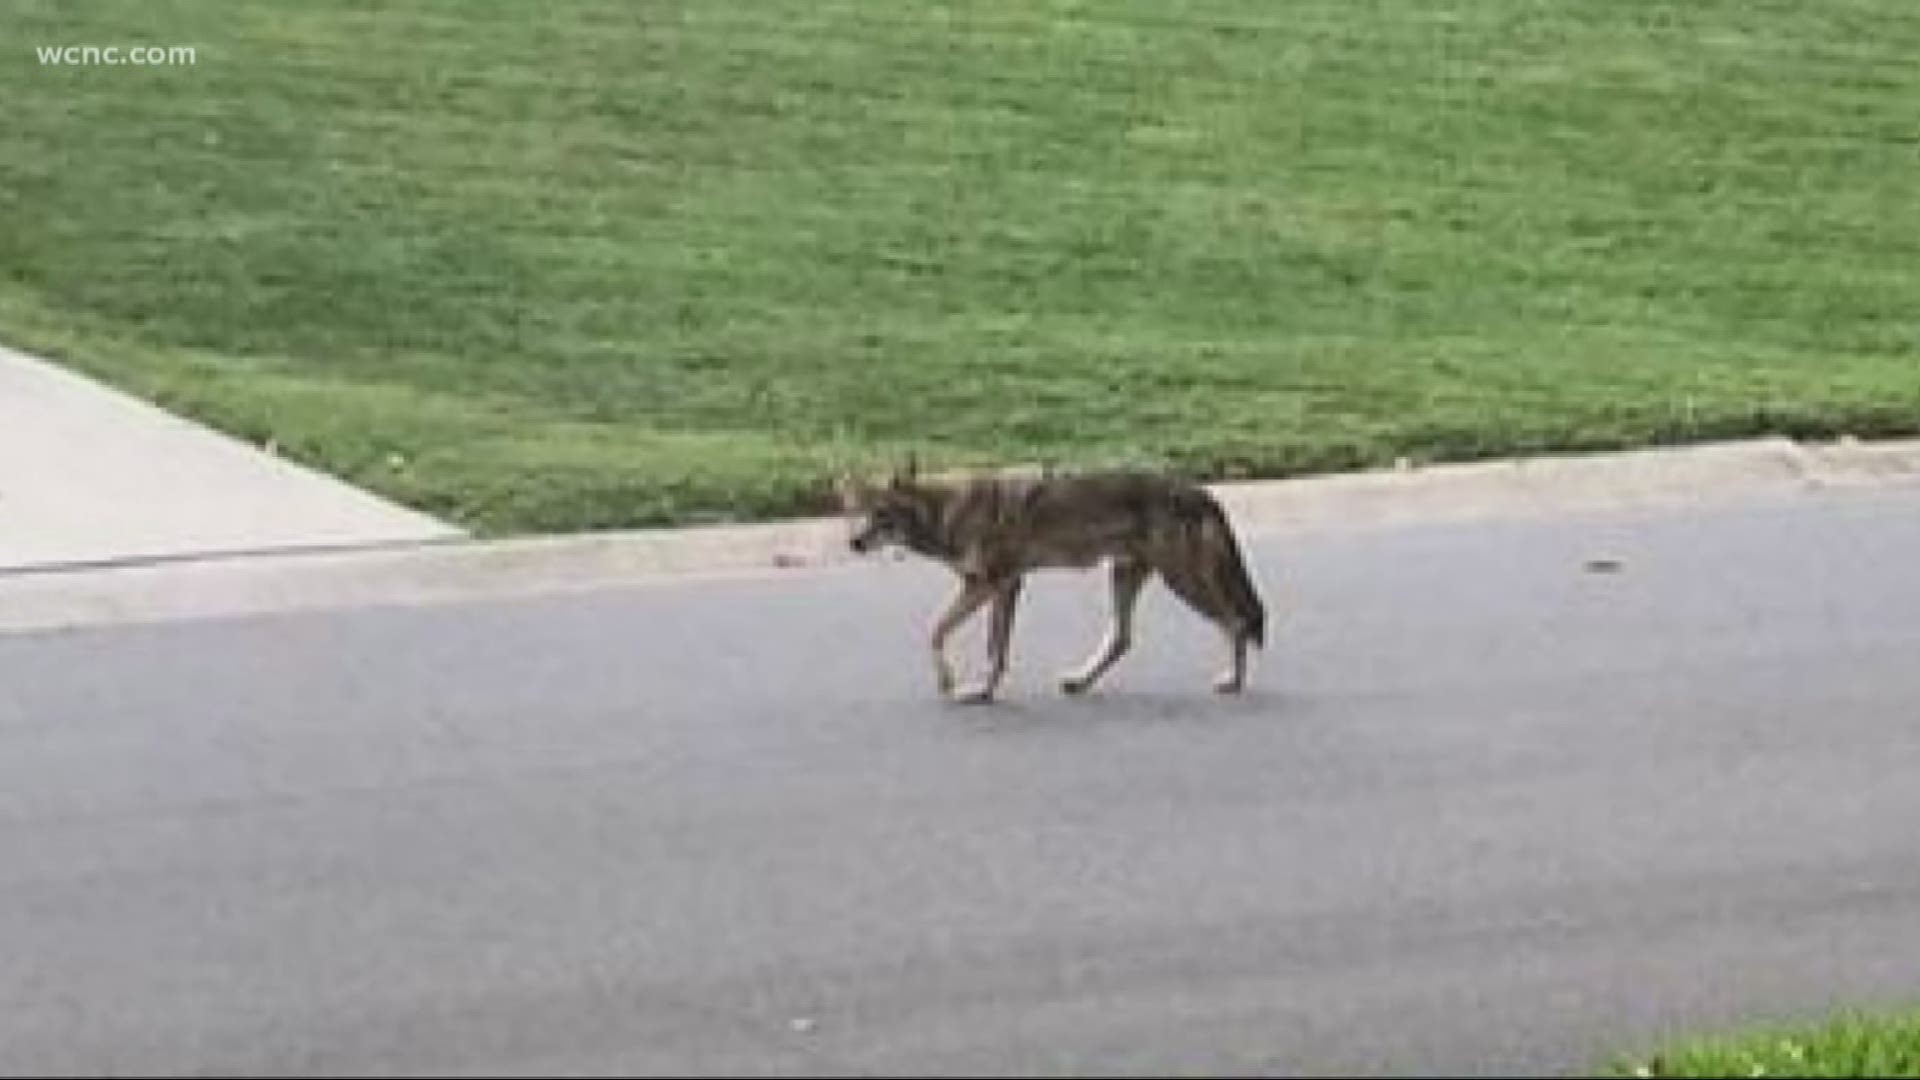 Chris Matthews, division director for Mecklenburg County Park and Rec, said coyotes are a fairly common sighting in the Charlotte area, and there’s no reason to believe the population may be growing.